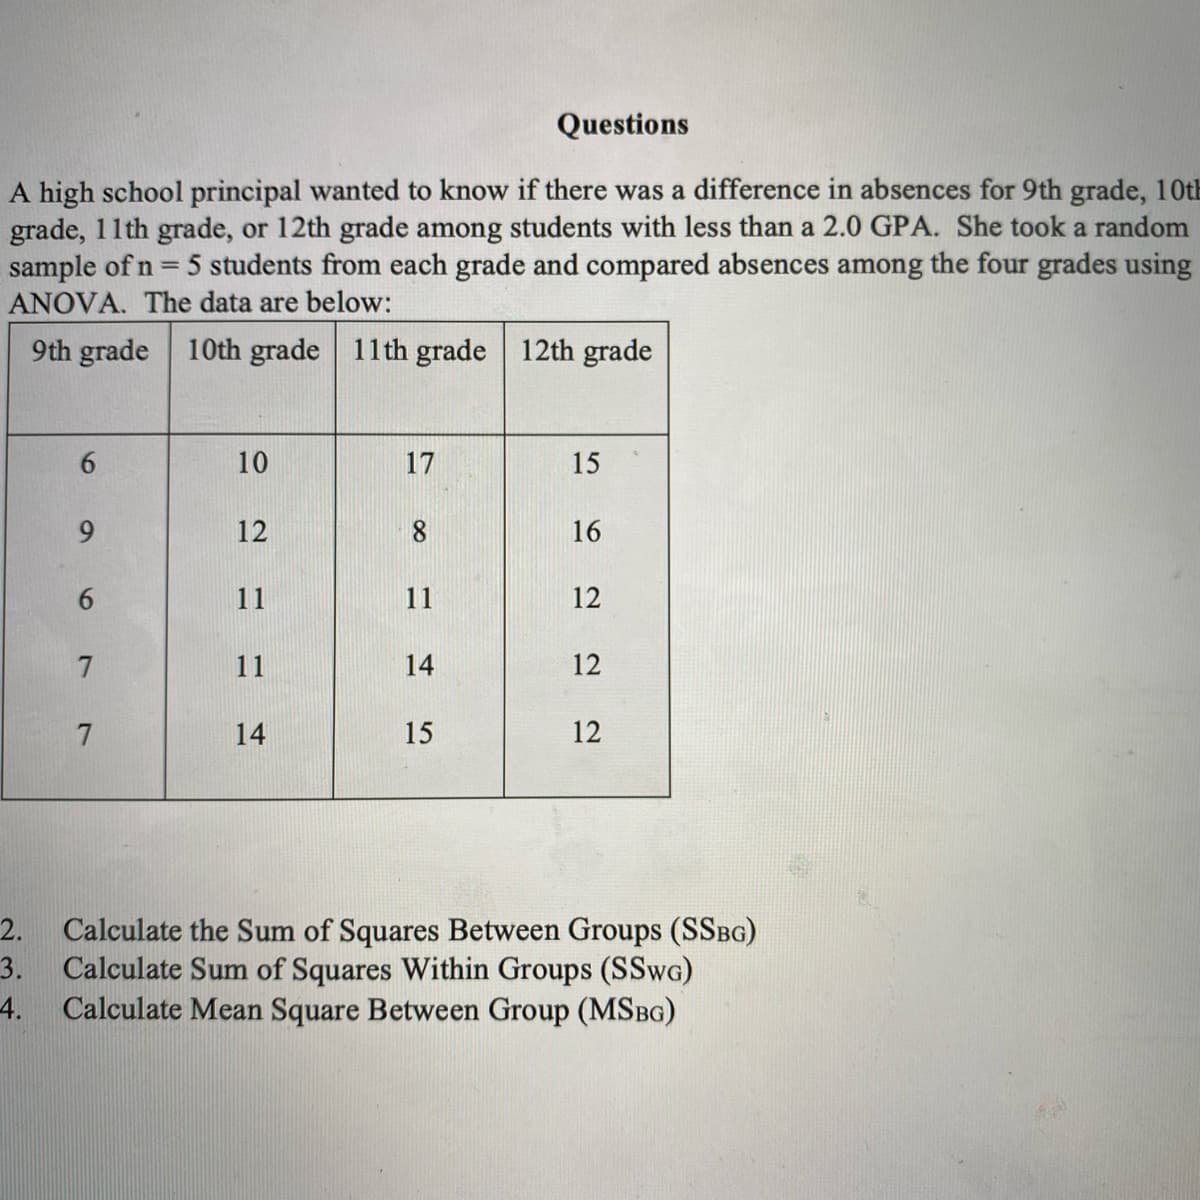 Questions
A high school principal wanted to know if there was a difference in absences for 9th grade, 10th
grade, 11th grade, or 12th grade among students with less than a 2.0 GPA. She took a random
sample of n = 5 students from each grade and compared absences among the four grades using
ANOVA. The data are below:
%3D
9th grade 10th grade 11th grade
12th grade
10
17
15
9.
12
8
16
11
11
12
7
11
12
14
15
12
2.
Calculate the Sum of Squares Between Groups (SSBG)
3.
Calculate Sum of Squares Within Groups (SSWG)
4.
Calculate Mean Square Between Group (MSBG)
14
6
